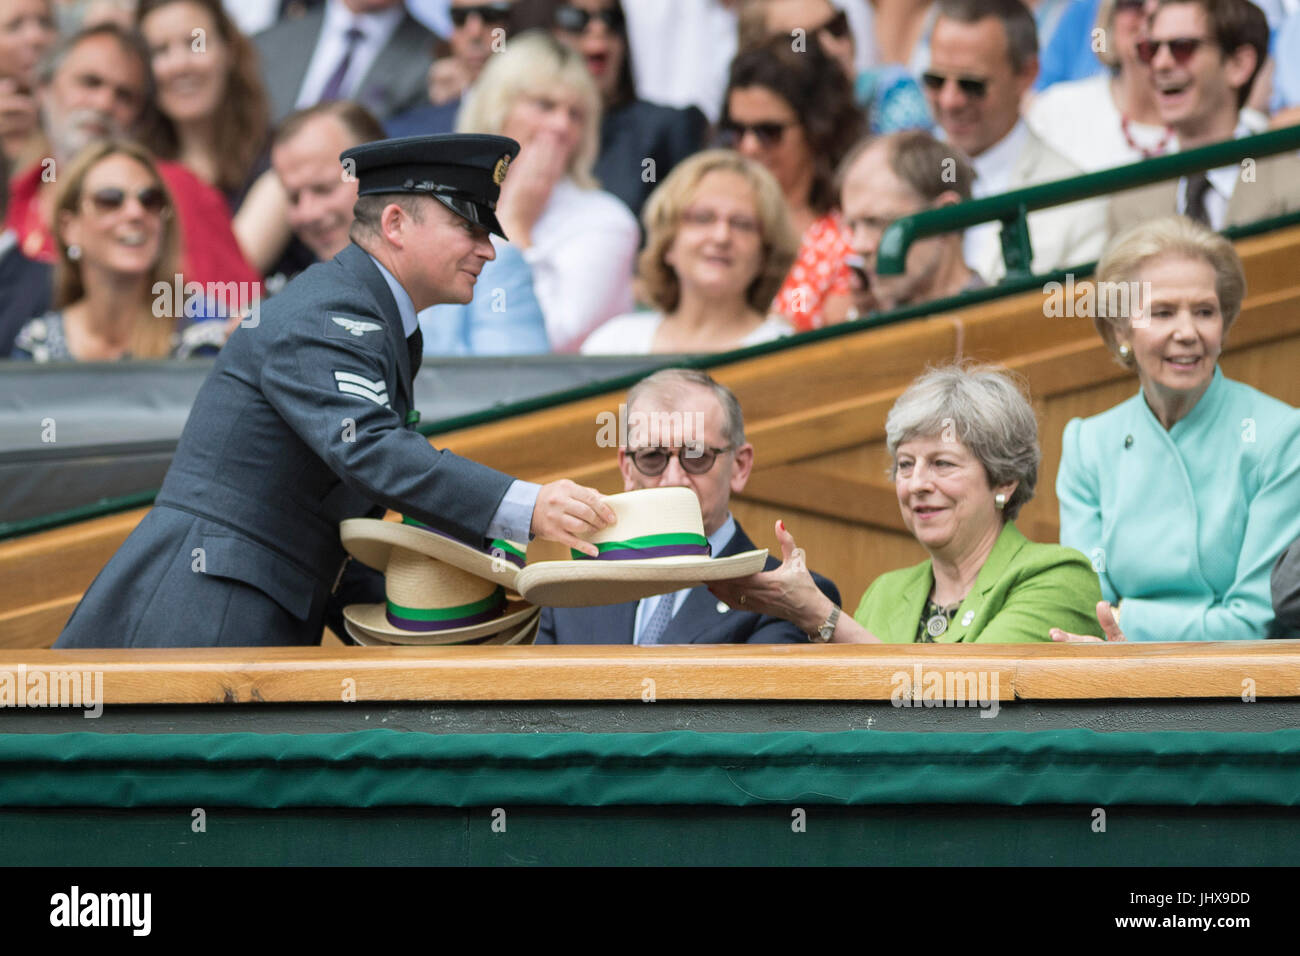 Wimbledon, London, UK. 16th July, 2017. The Wimbledon Tennis Championships 2017 held at The All England Lawn Tennis and Croquet Club, London, England, UK. GENTLEMEN'S SINGLES - FINAL Roger Federer (SUI) [3] v Marin Cilic (CRO) [7] on Centre Court. Prime Minister Theresa May watches the match from the Royal Box with her husband Philip. She assists a steward to distribute panama hats to other guests in the Royal Box. Credit: Duncan Grove/Alamy Live News Stock Photo